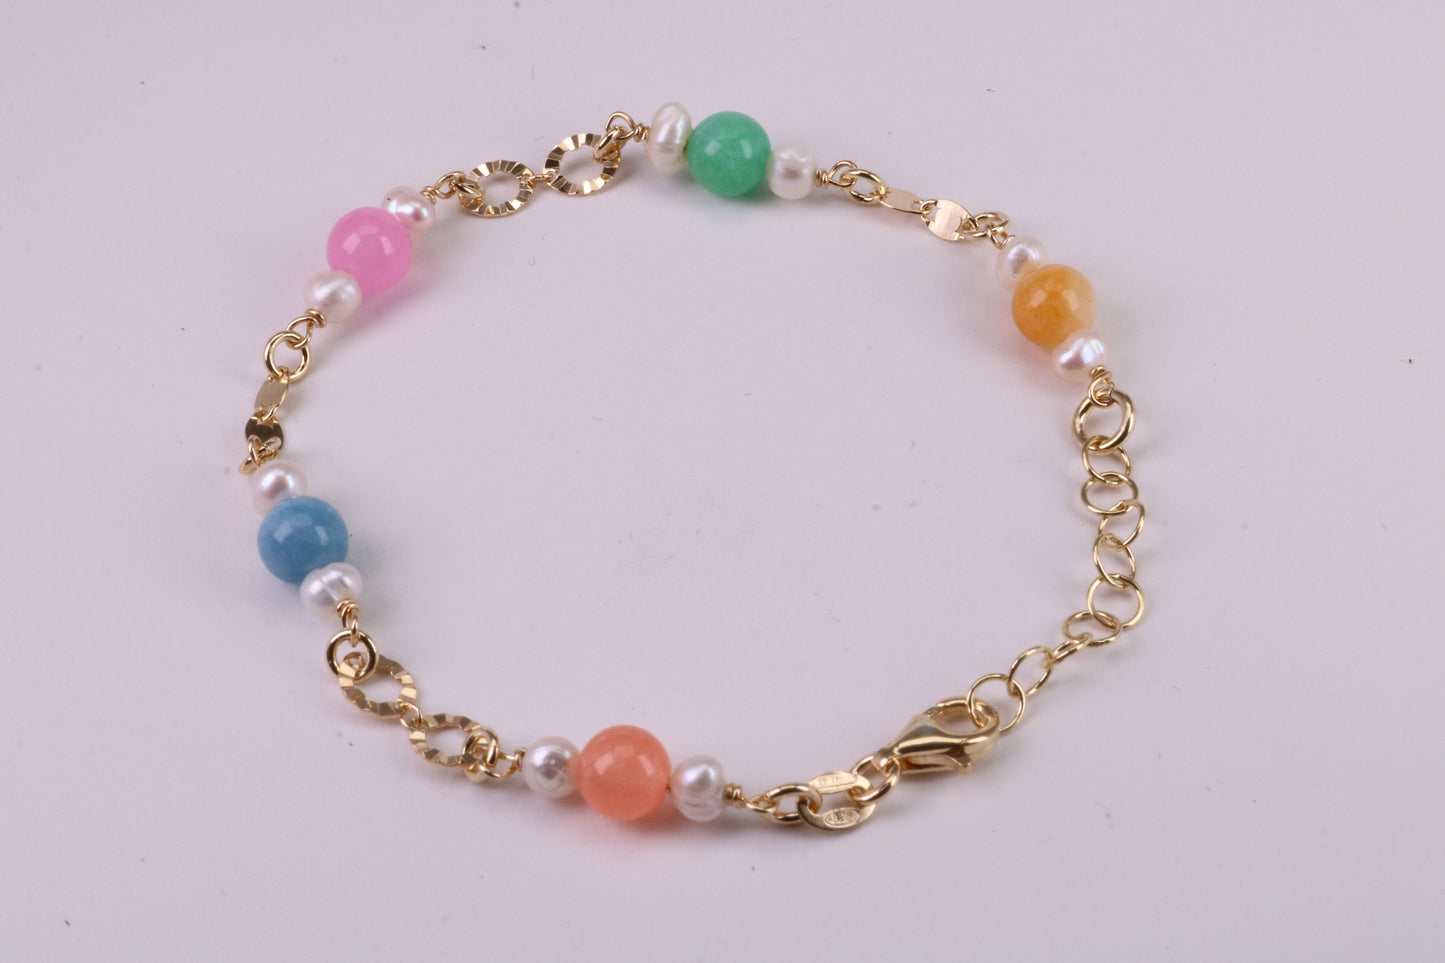 Rainbow Bracelet, With Length Adjustable Chain, Made from solid Sterling Silver and Further 18ct Yellow Gold Plated